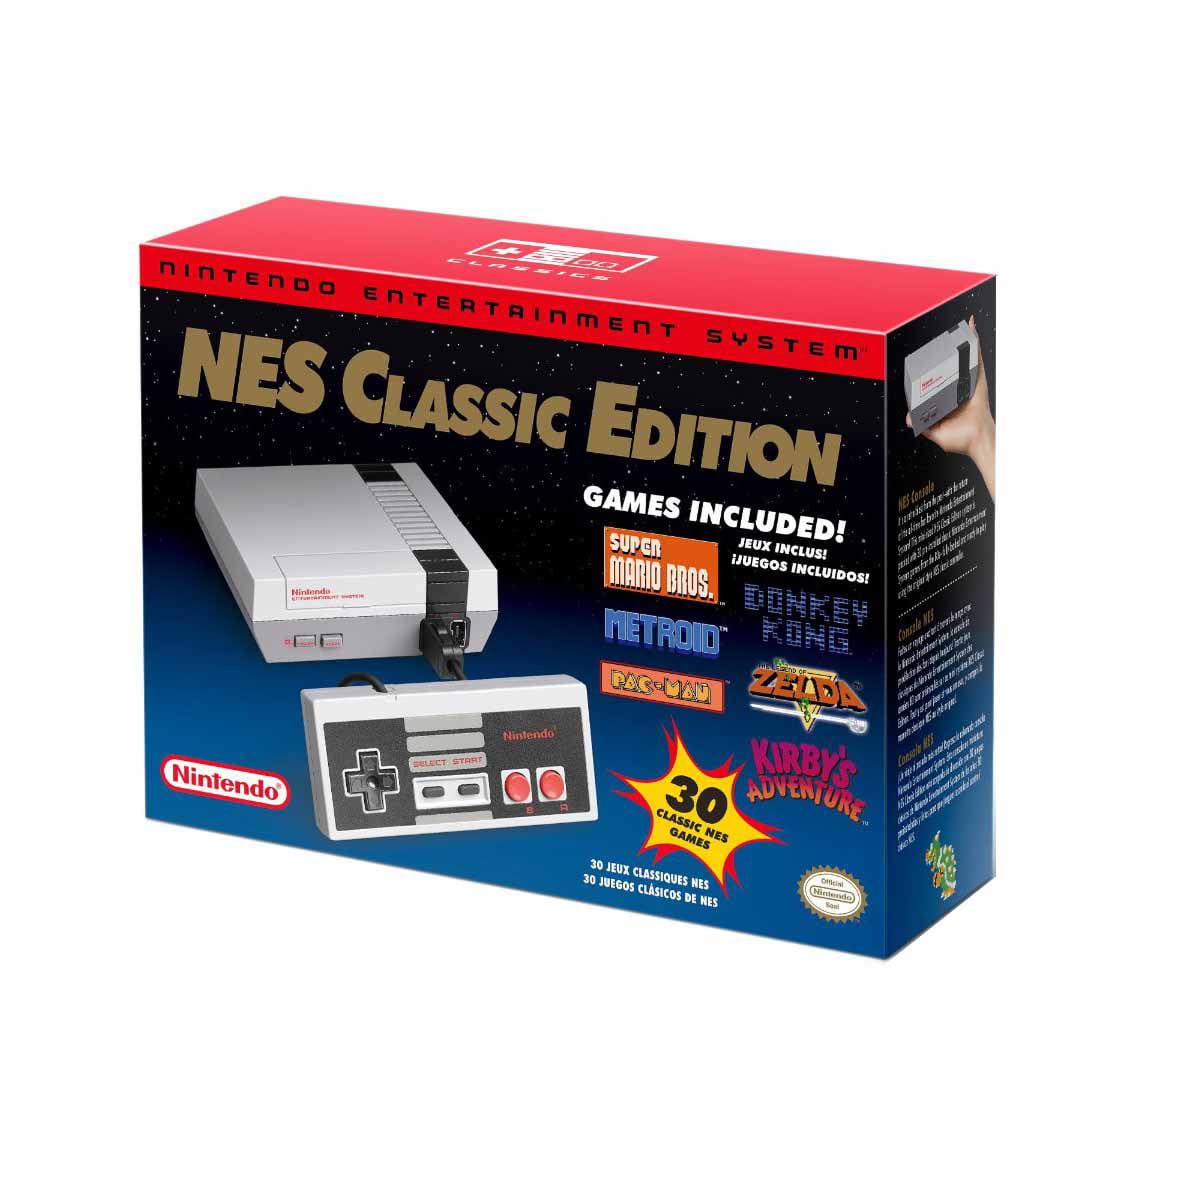 Seks overførsel beløb Nintendo Entertainment System: NES Classic Edition with 30 Pre-Loaded Games  - Walmart.com